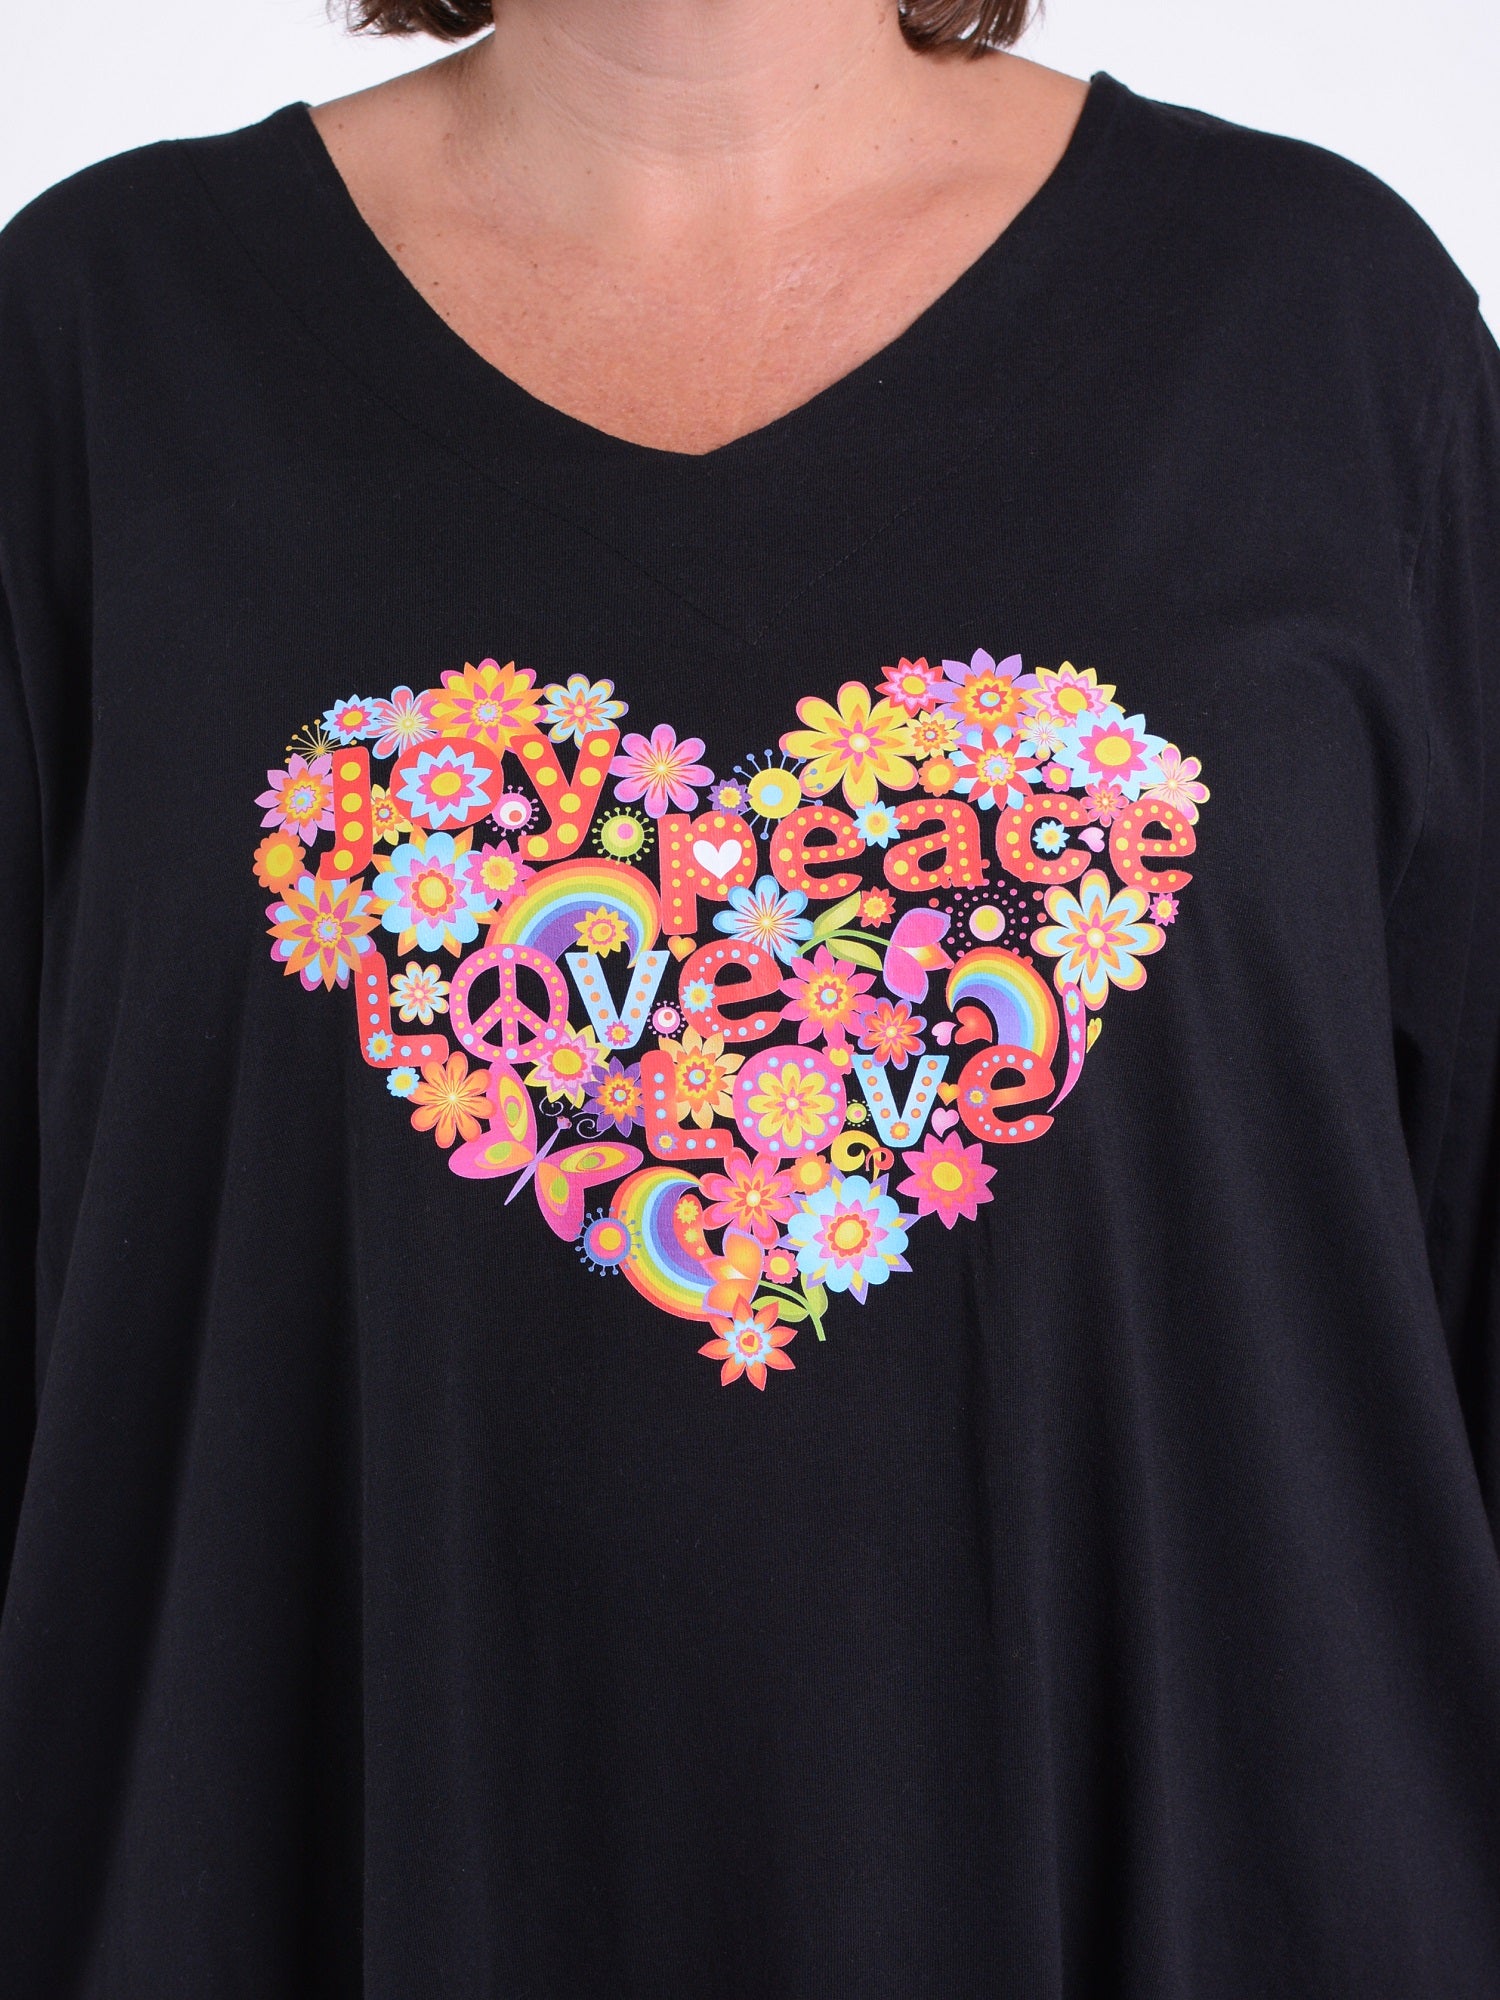 Cotton Swing Top  V Neck PEACE AND LOVE - 20520, Tops & Shirts, Pure Plus Clothing, Lagenlook Clothing, Plus Size Fashion, Over 50 Fashion